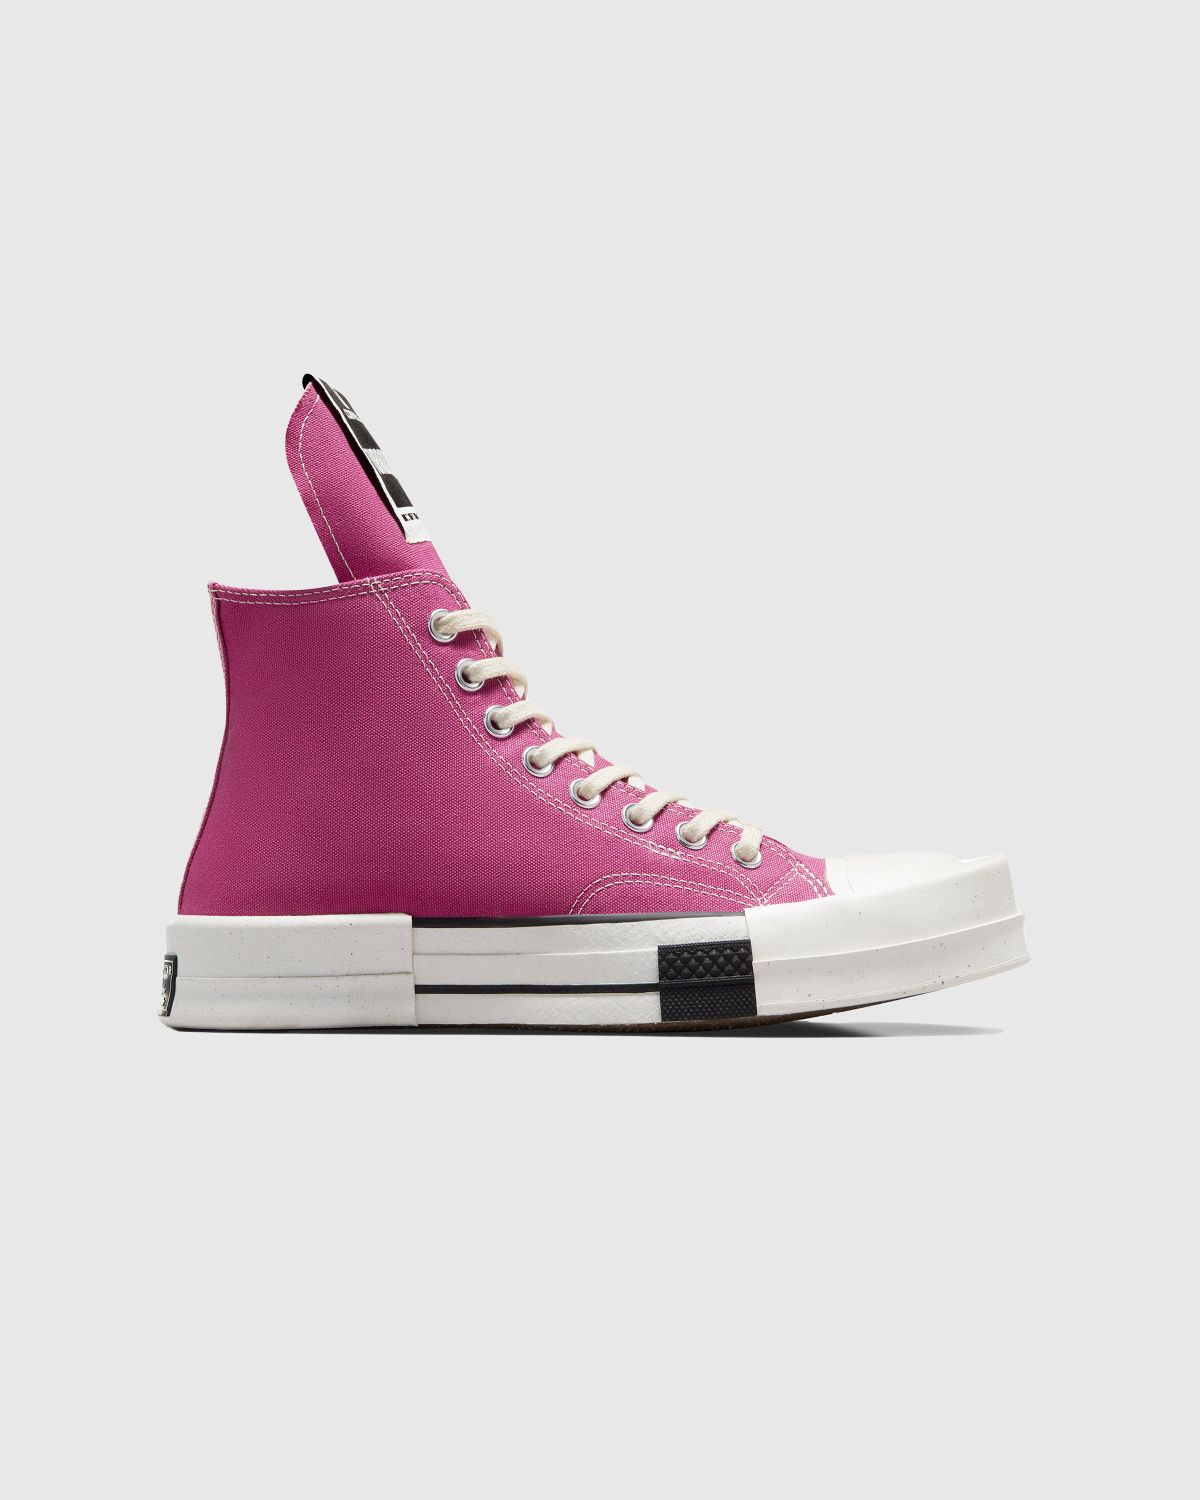 Converse x DRKSHDW – TURBODRK Chuck 70 Laceless Hi Pink - High Top Sneakers - Pink - Image 3